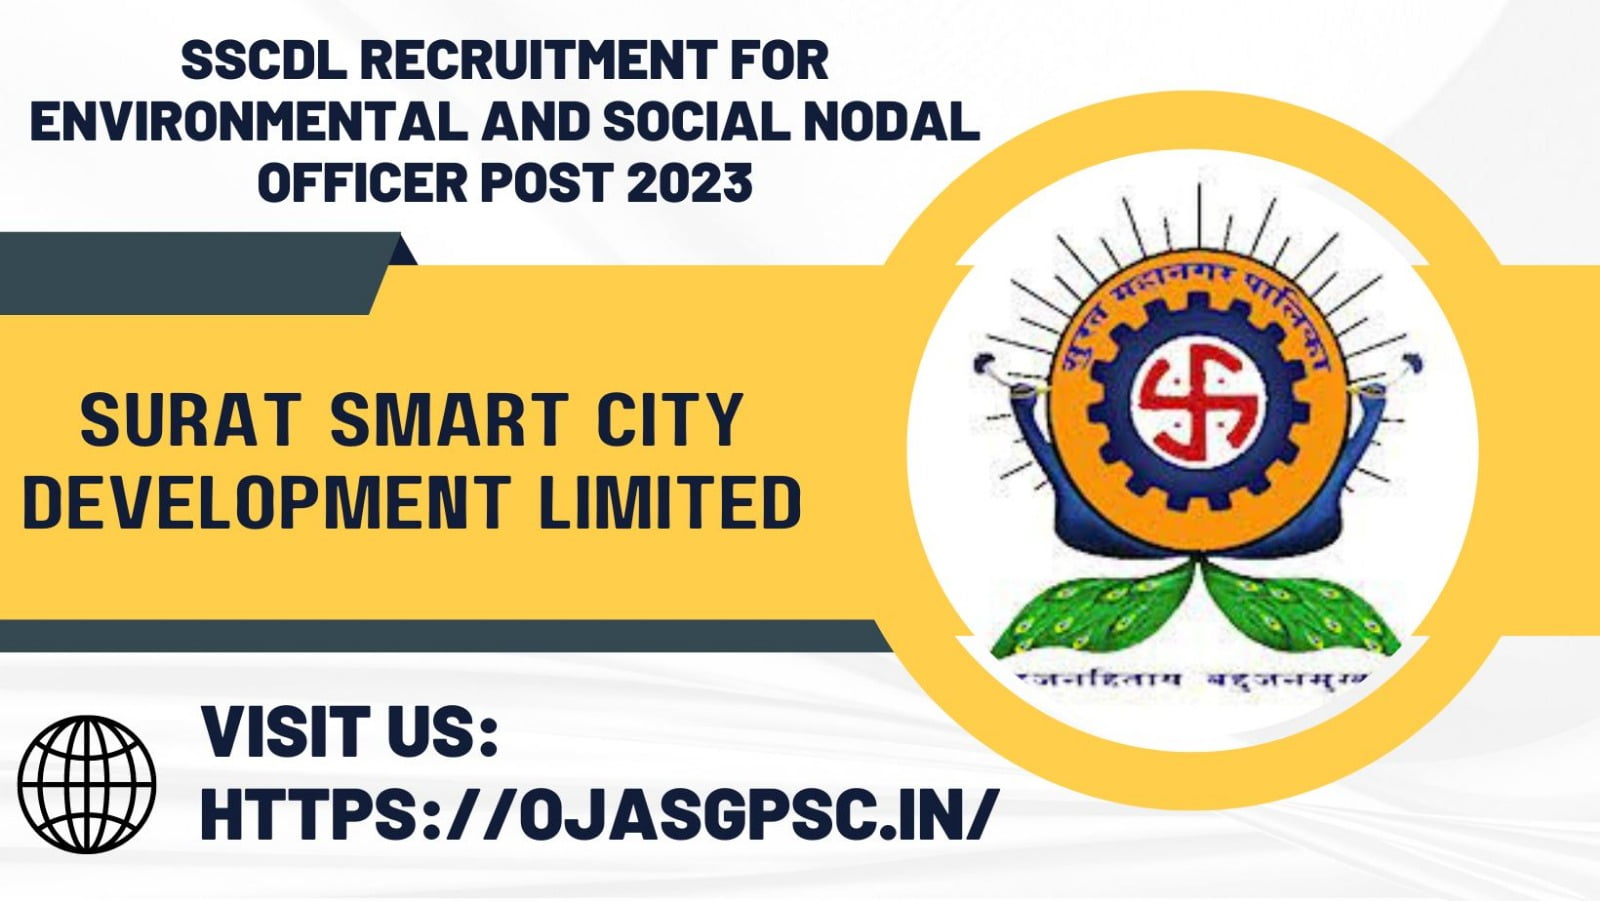 SSCDL Recruitment for Environmental and Social Nodal Officer Post 2023